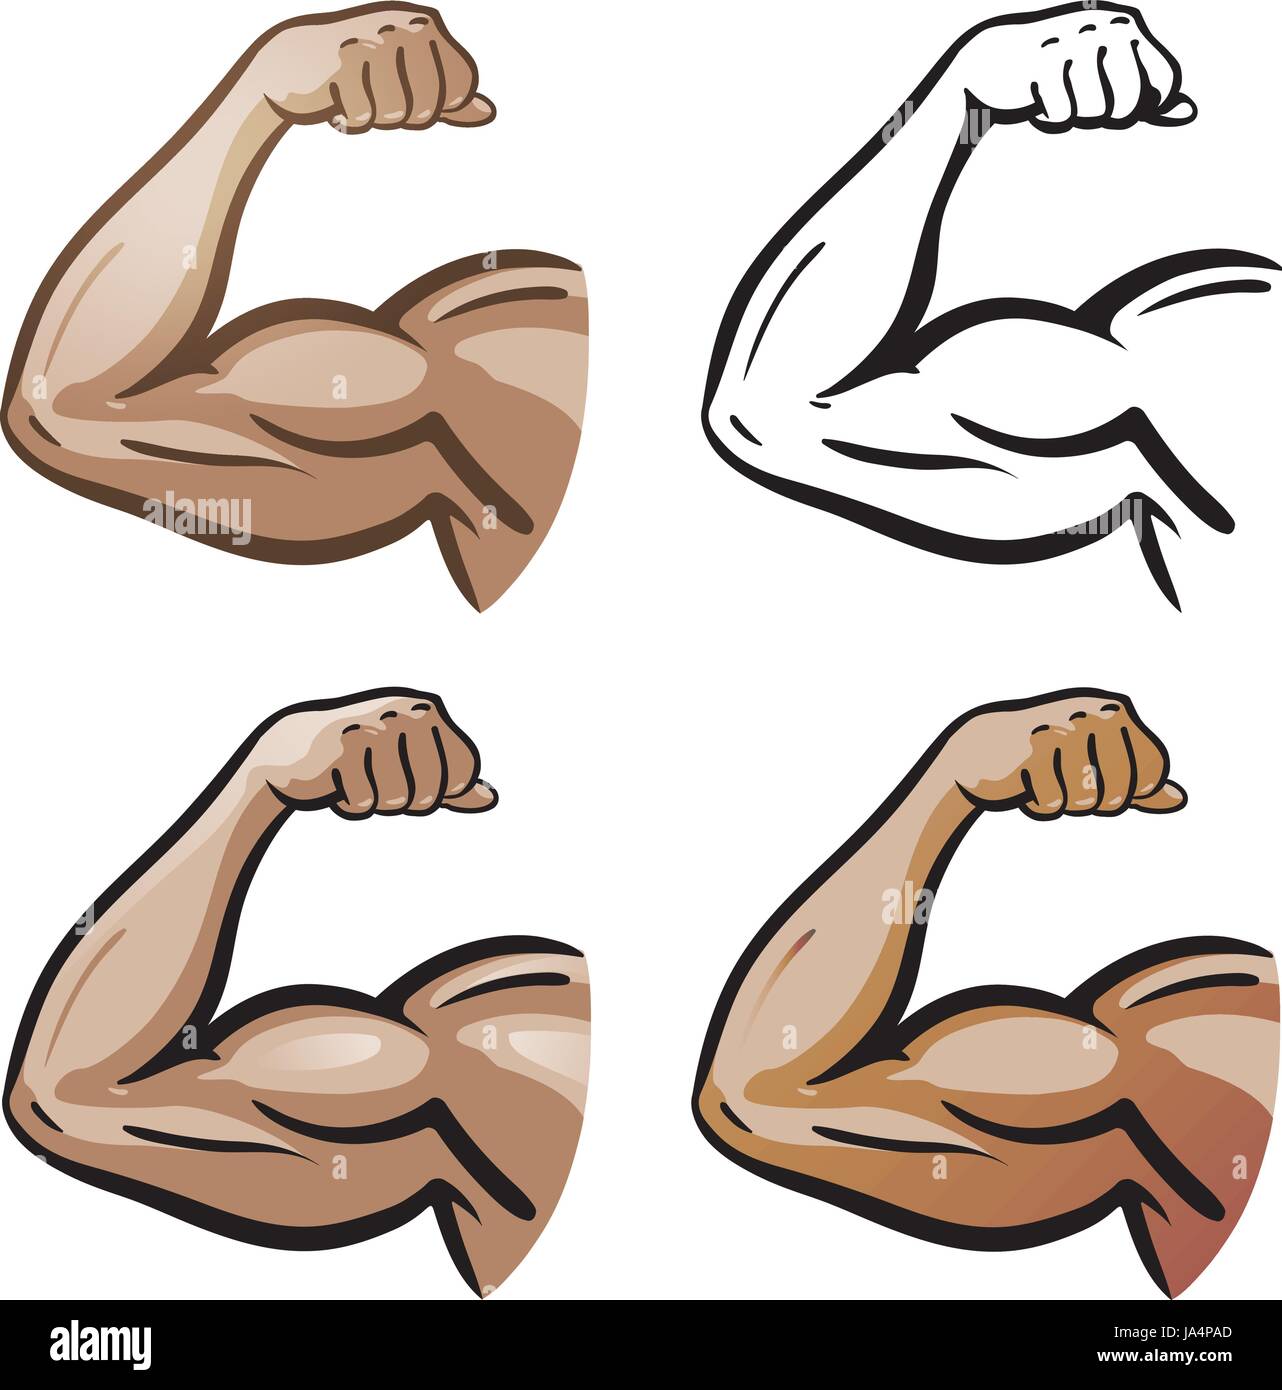 https://c8.alamy.com/comp/JA4PAD/strong-male-arm-hand-muscles-biceps-icon-or-symbol-gym-health-protein-JA4PAD.jpg